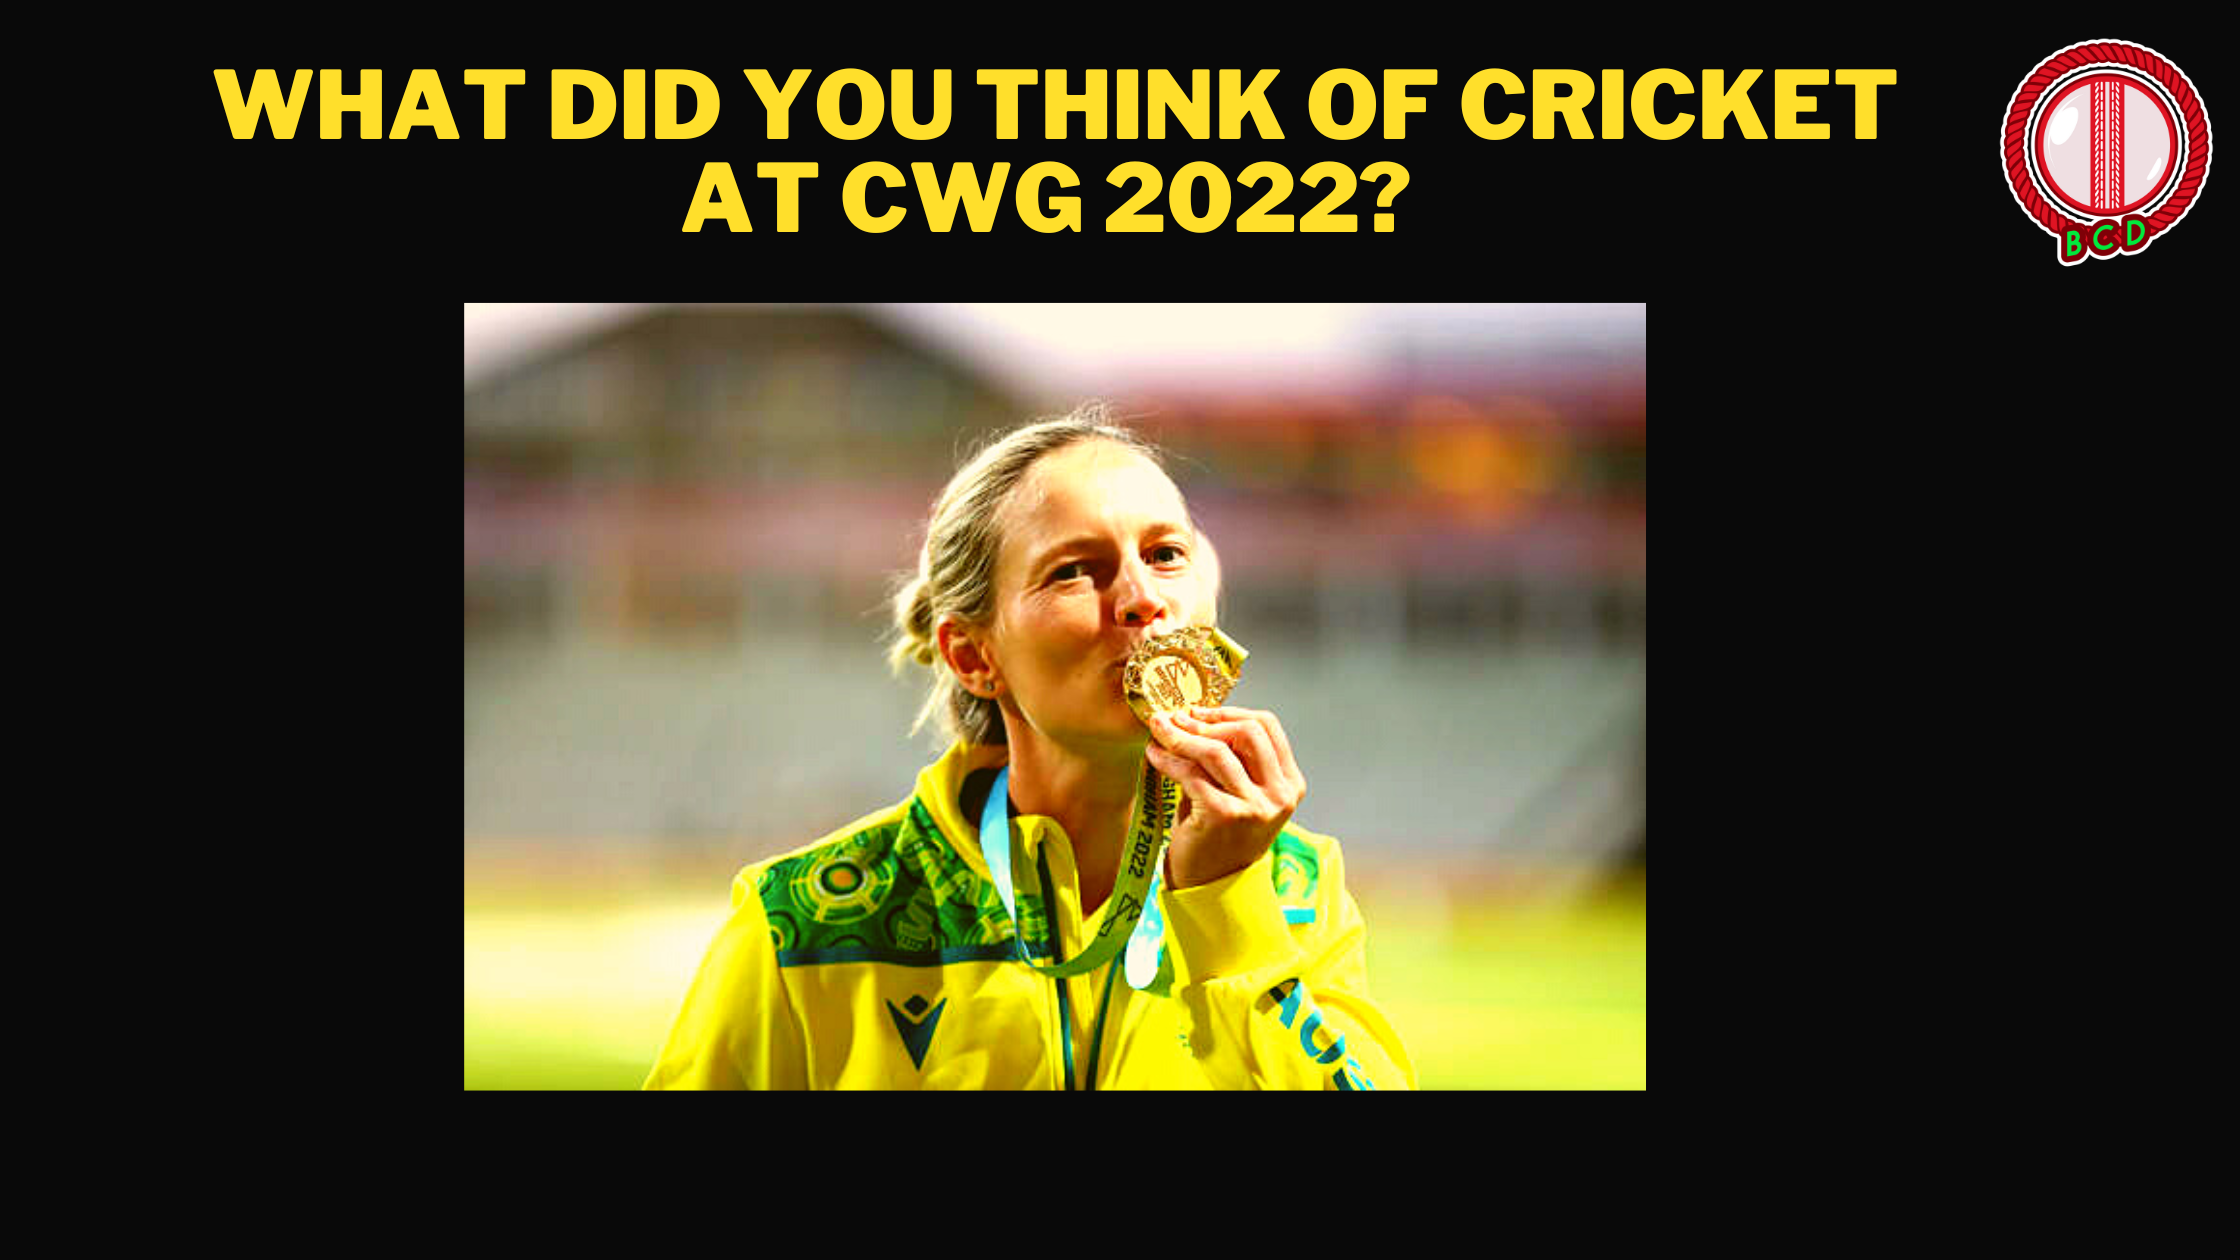 Cricket in CWG 222 - Photo of Meg Lanning With Medal